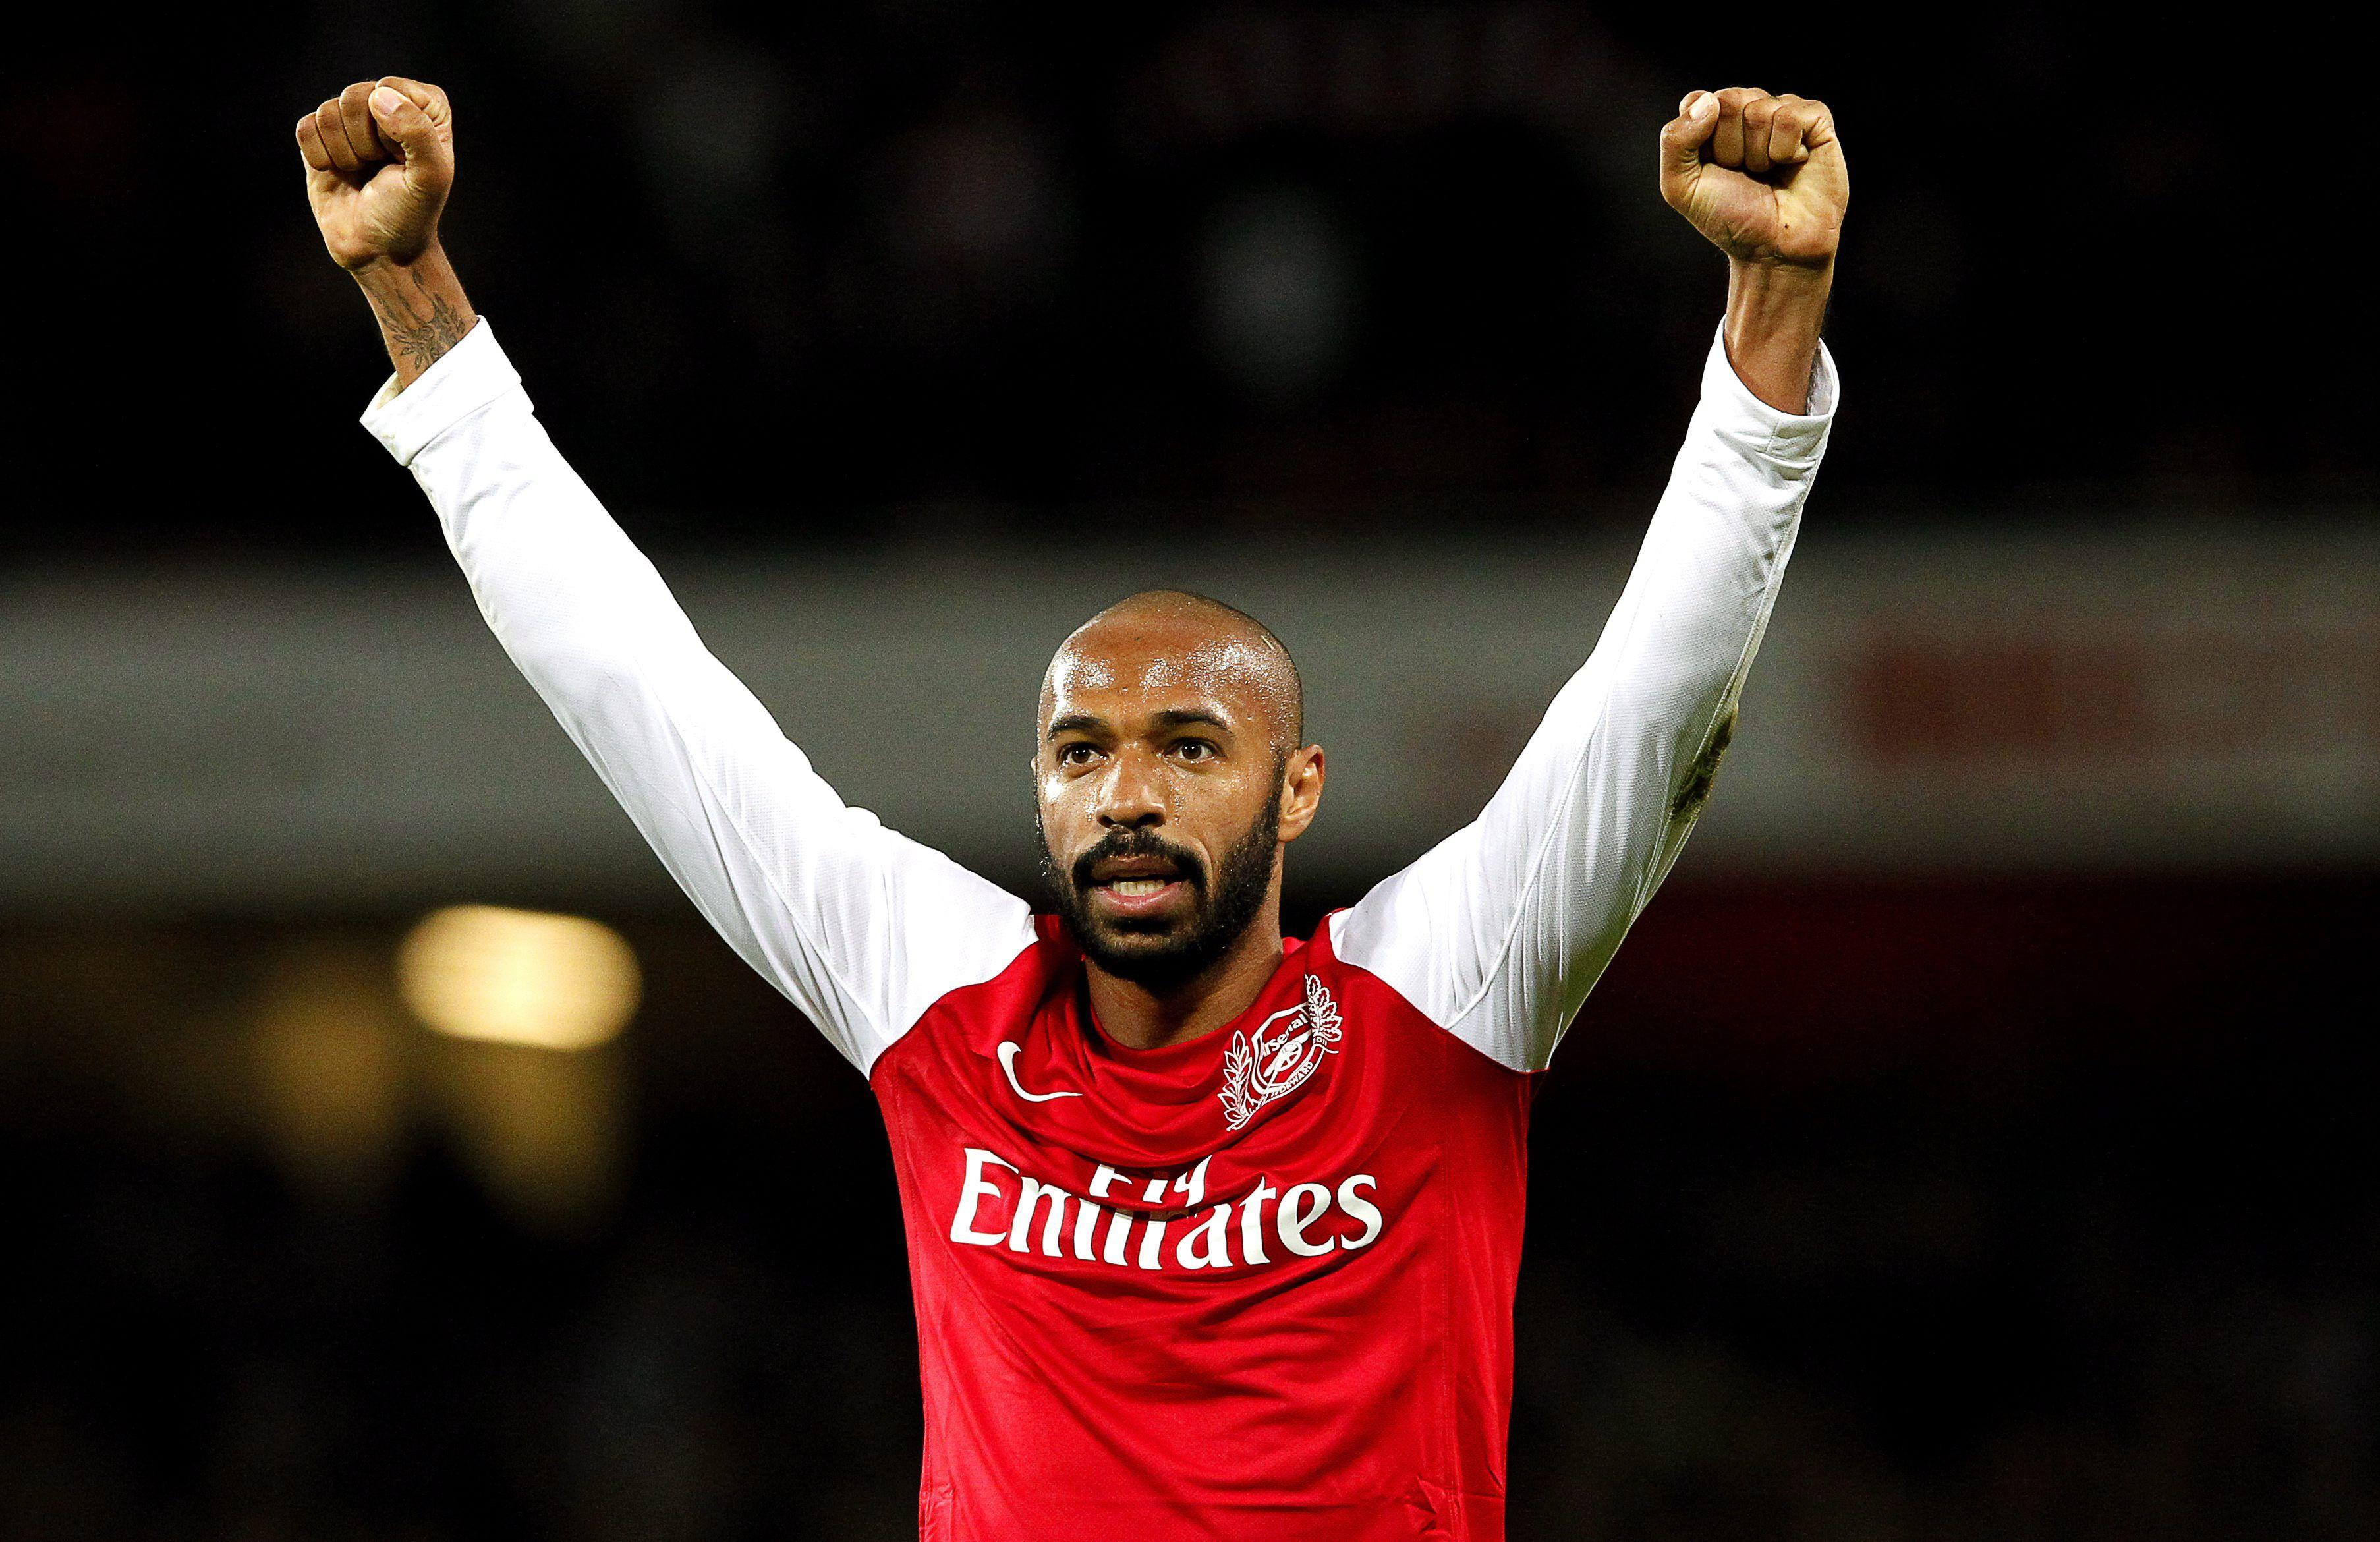 Thierry Henry Hands Up HD Wallpaper